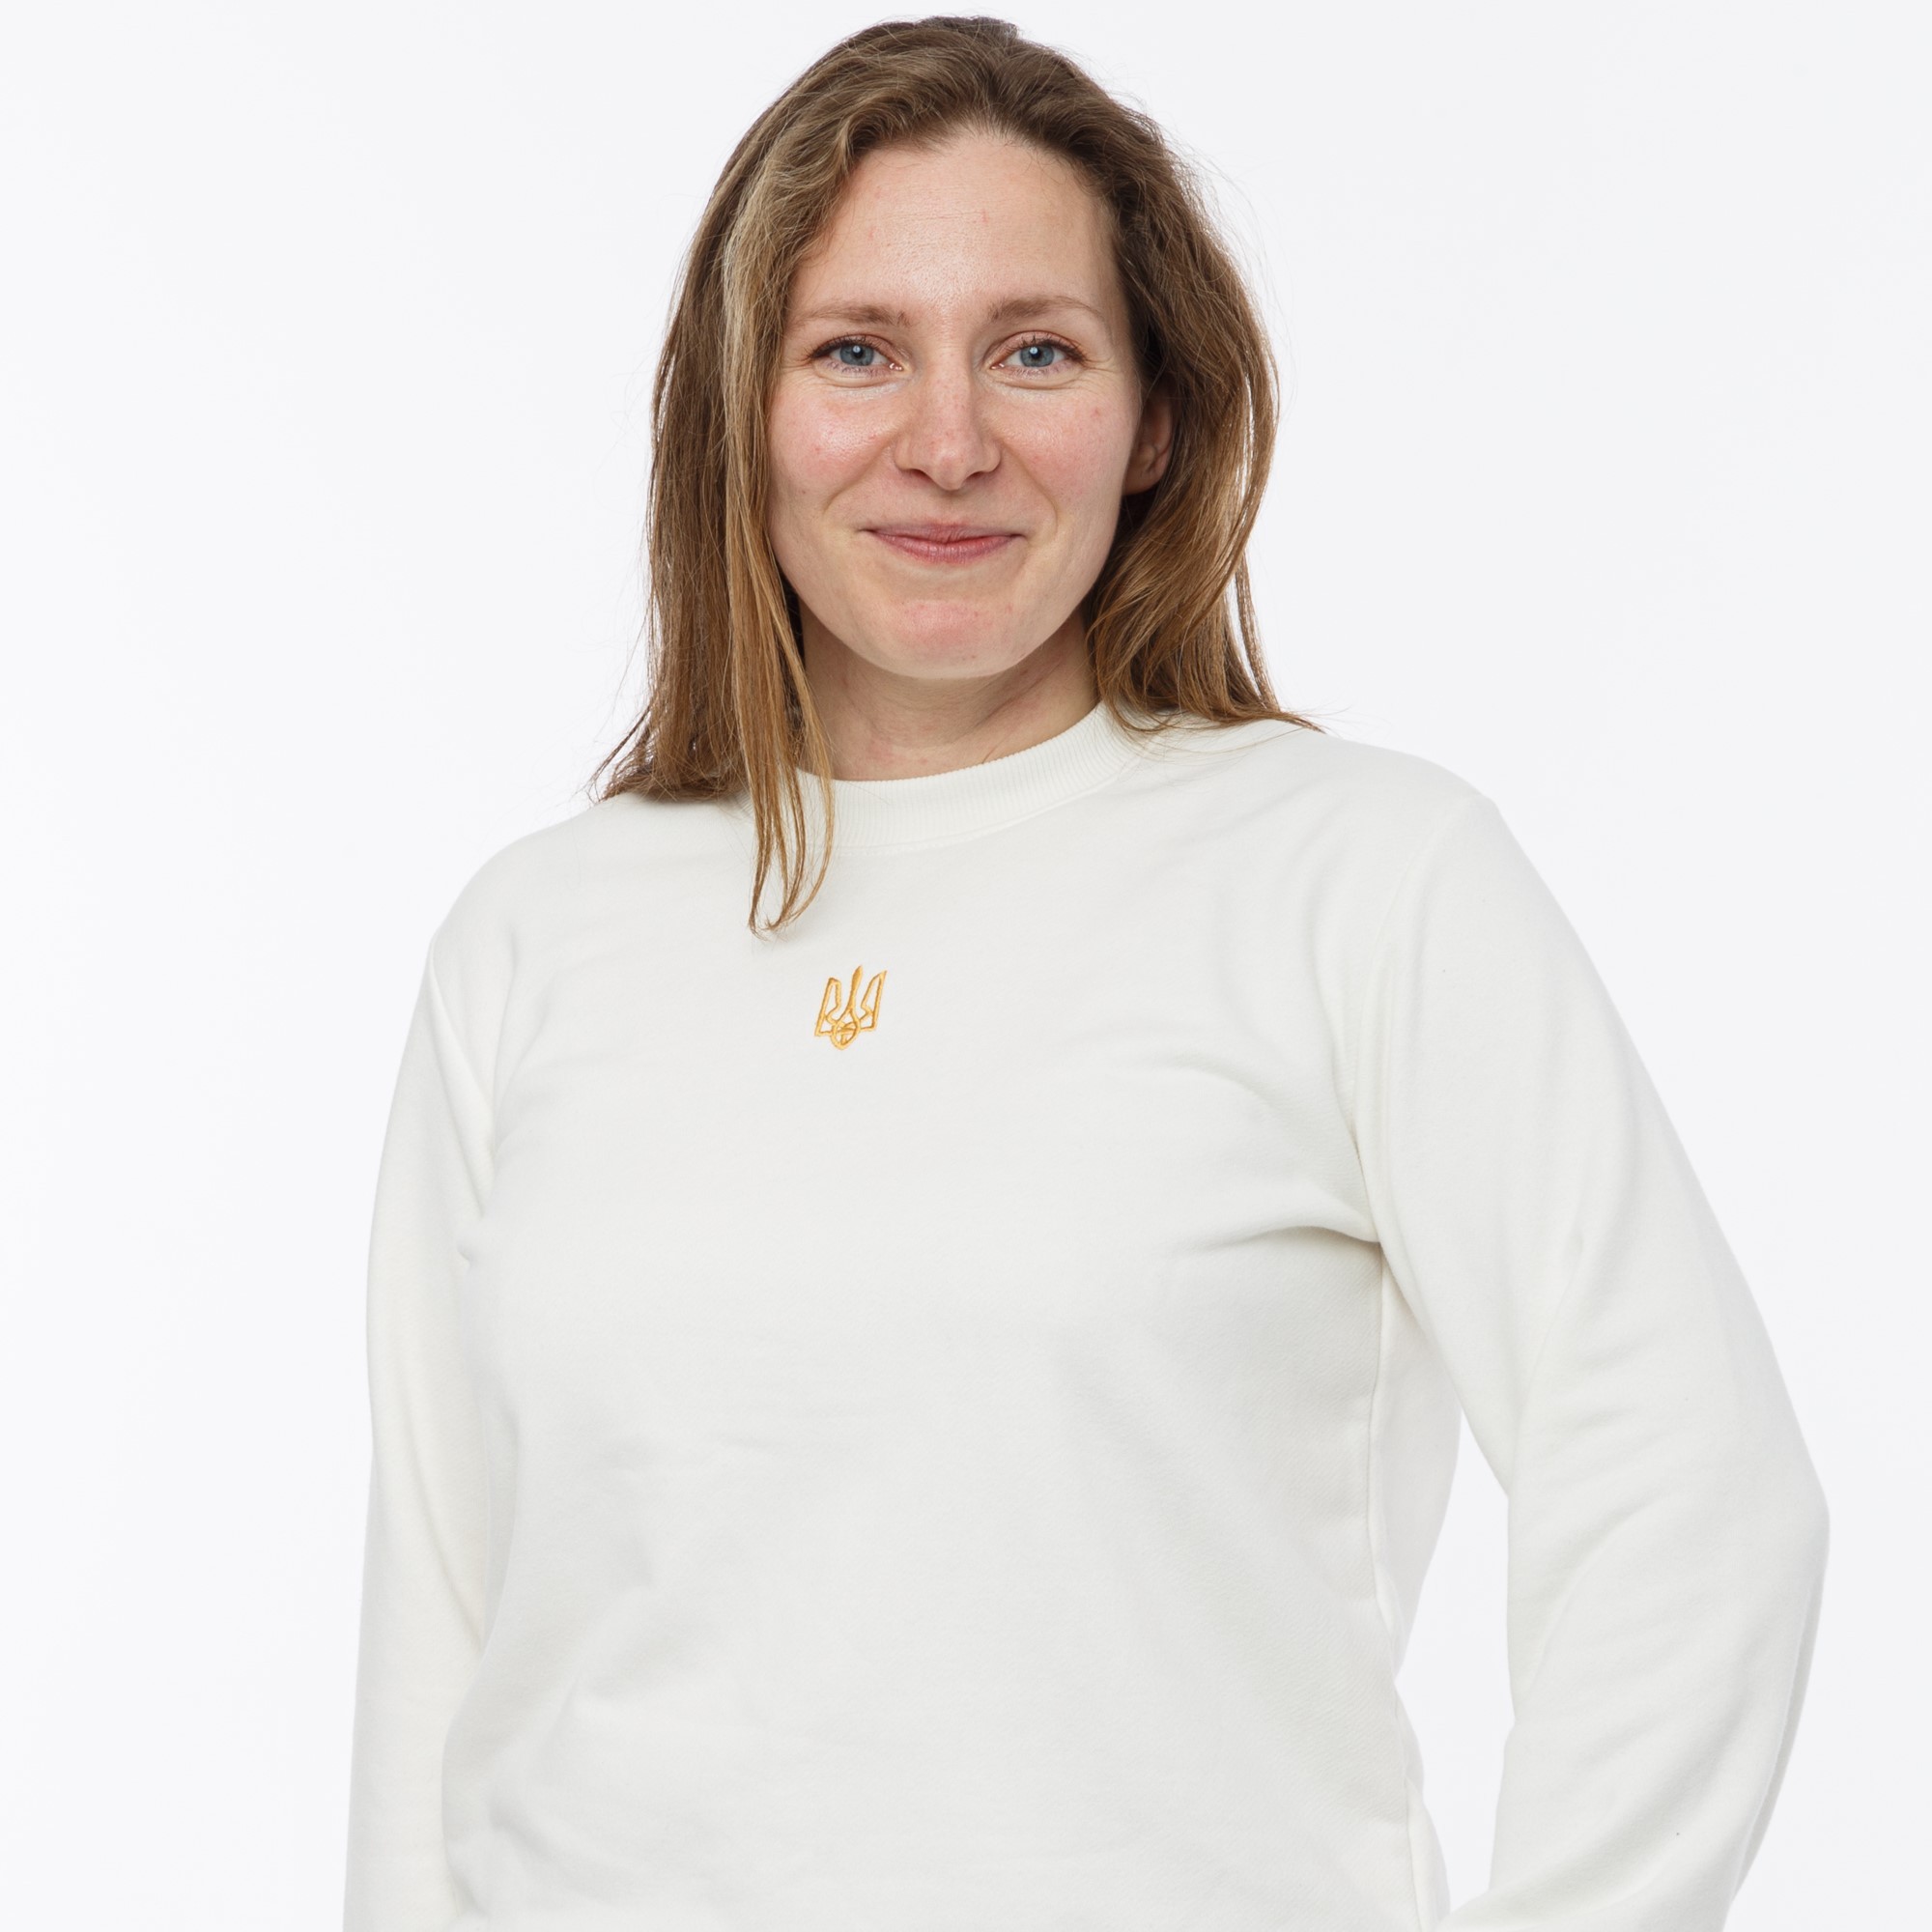 Women's sweatshirt with embroidery "classic tryzub" white